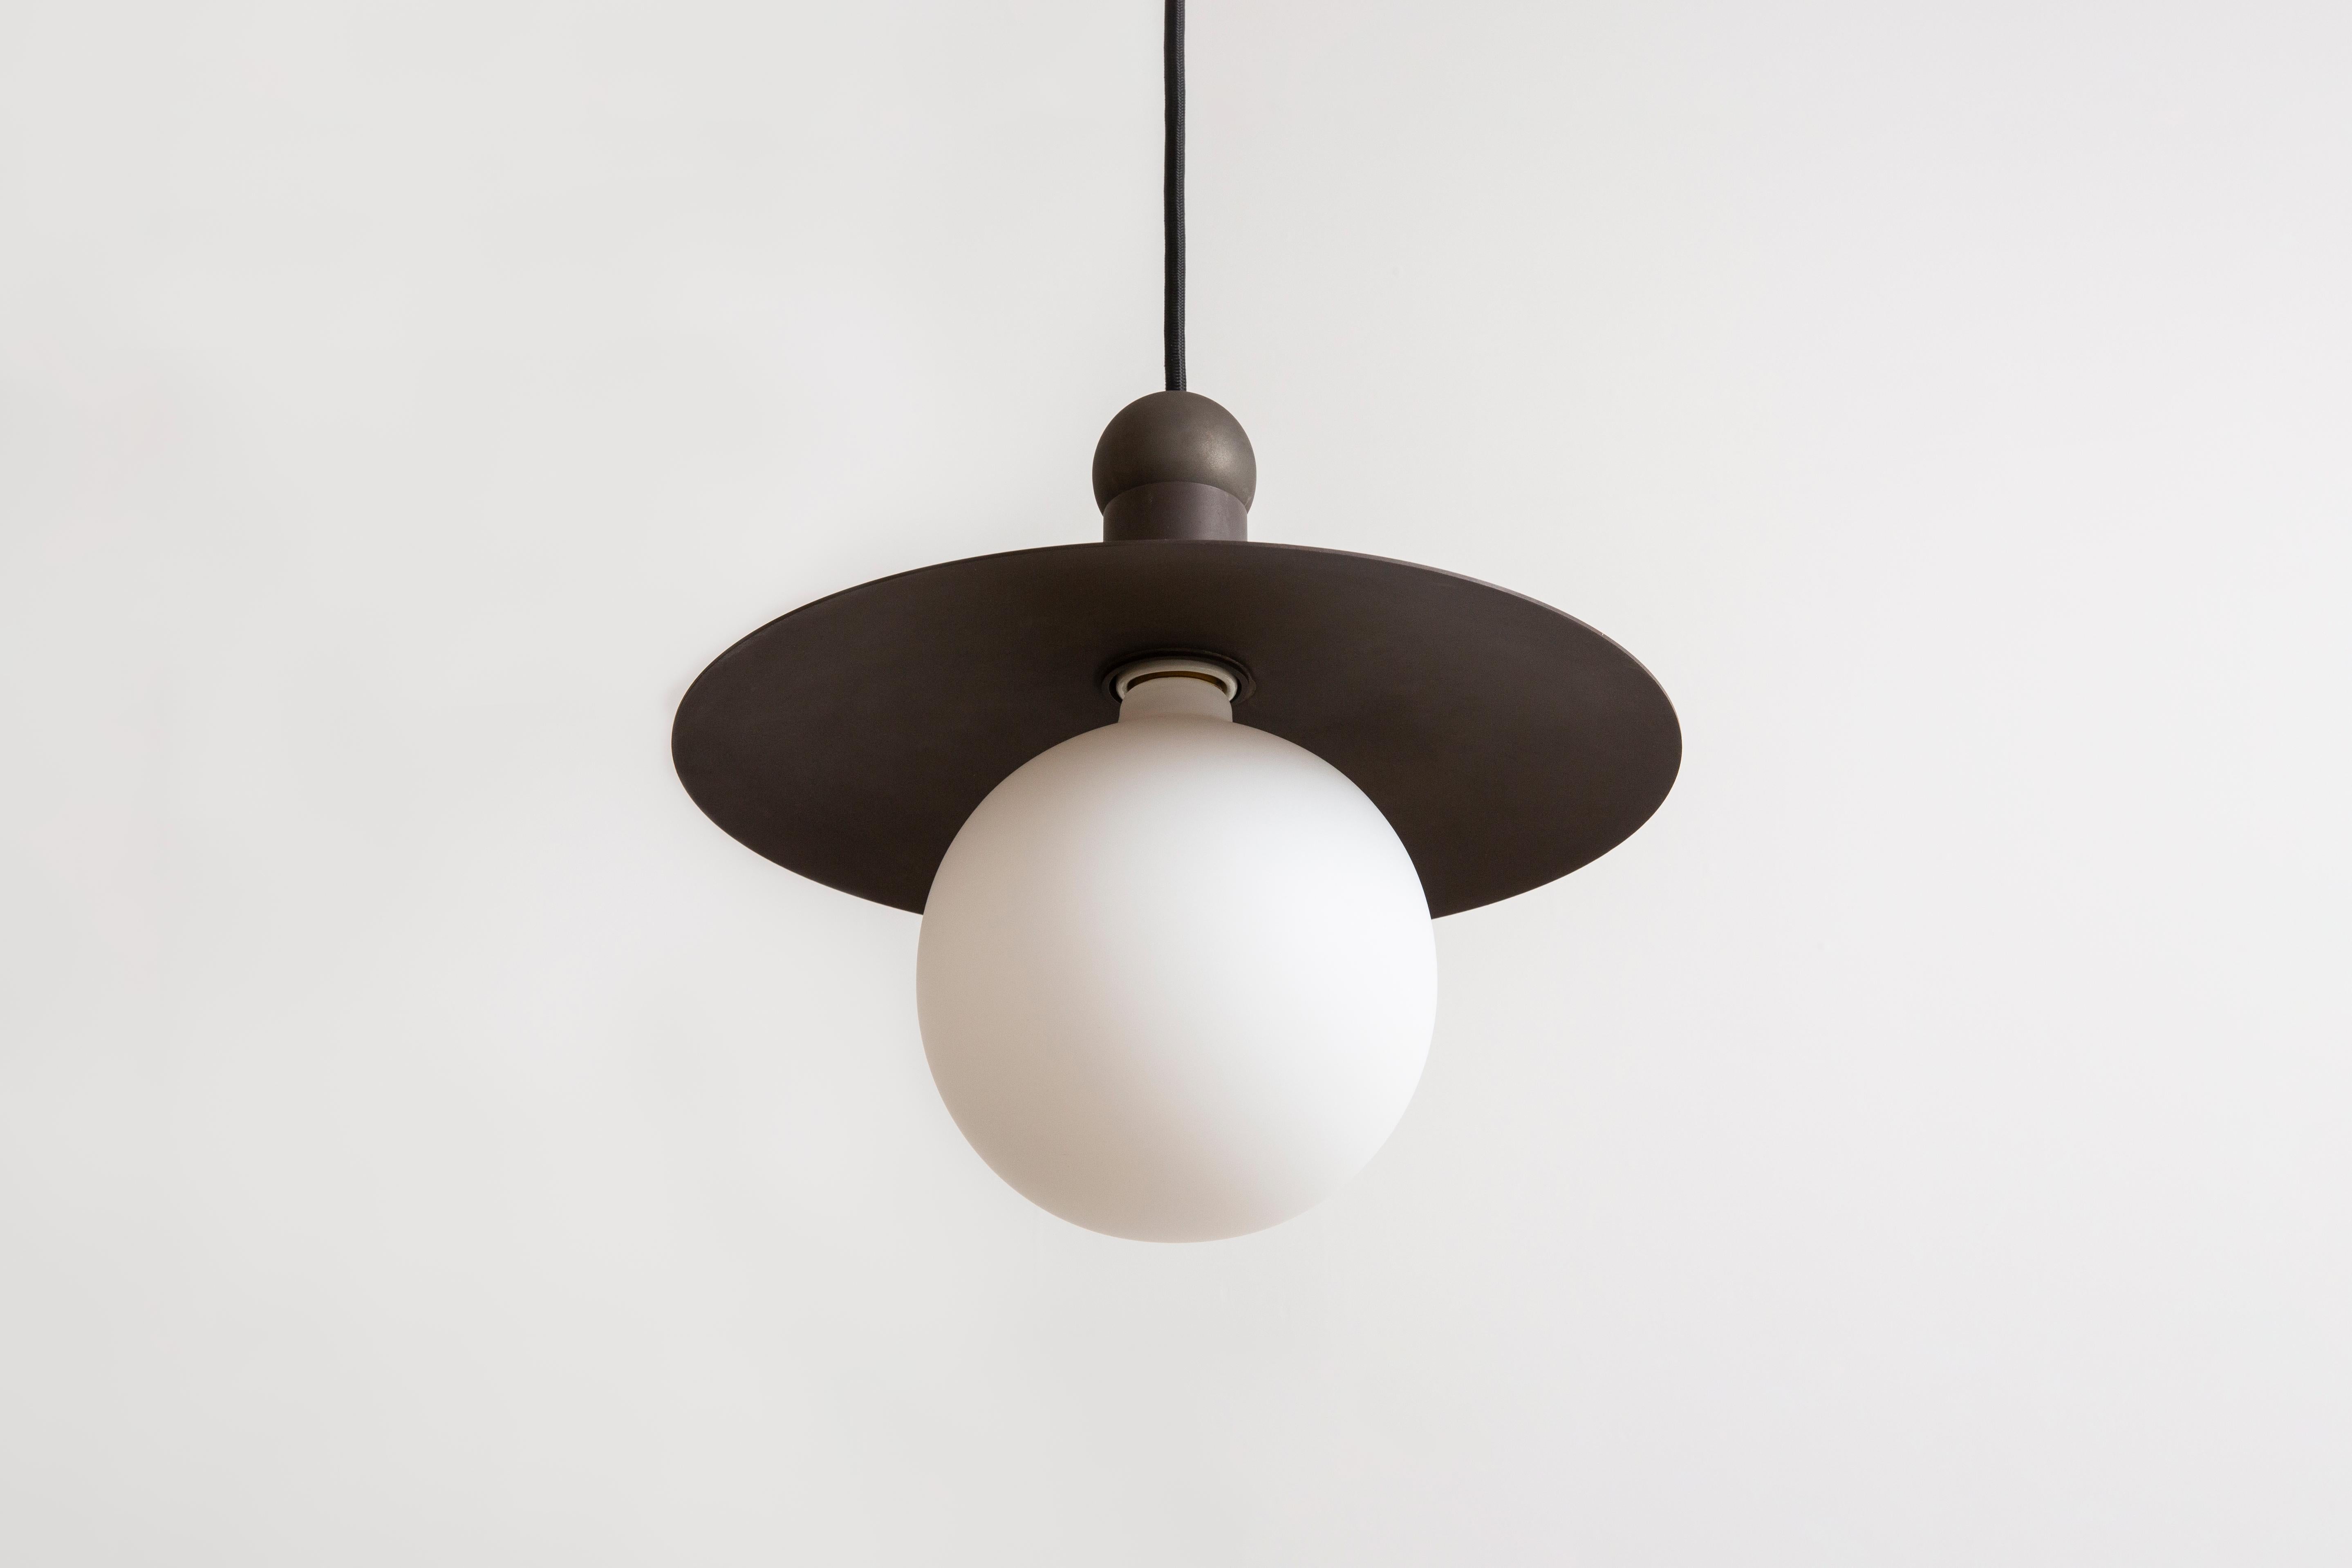 The Helios cord pendant positions a single glowing bulb against a stationary radiant dish, exploring the scale and illumination of an early American candle via the form of a traditional down-light pendant. With rotund details, each pendant provides